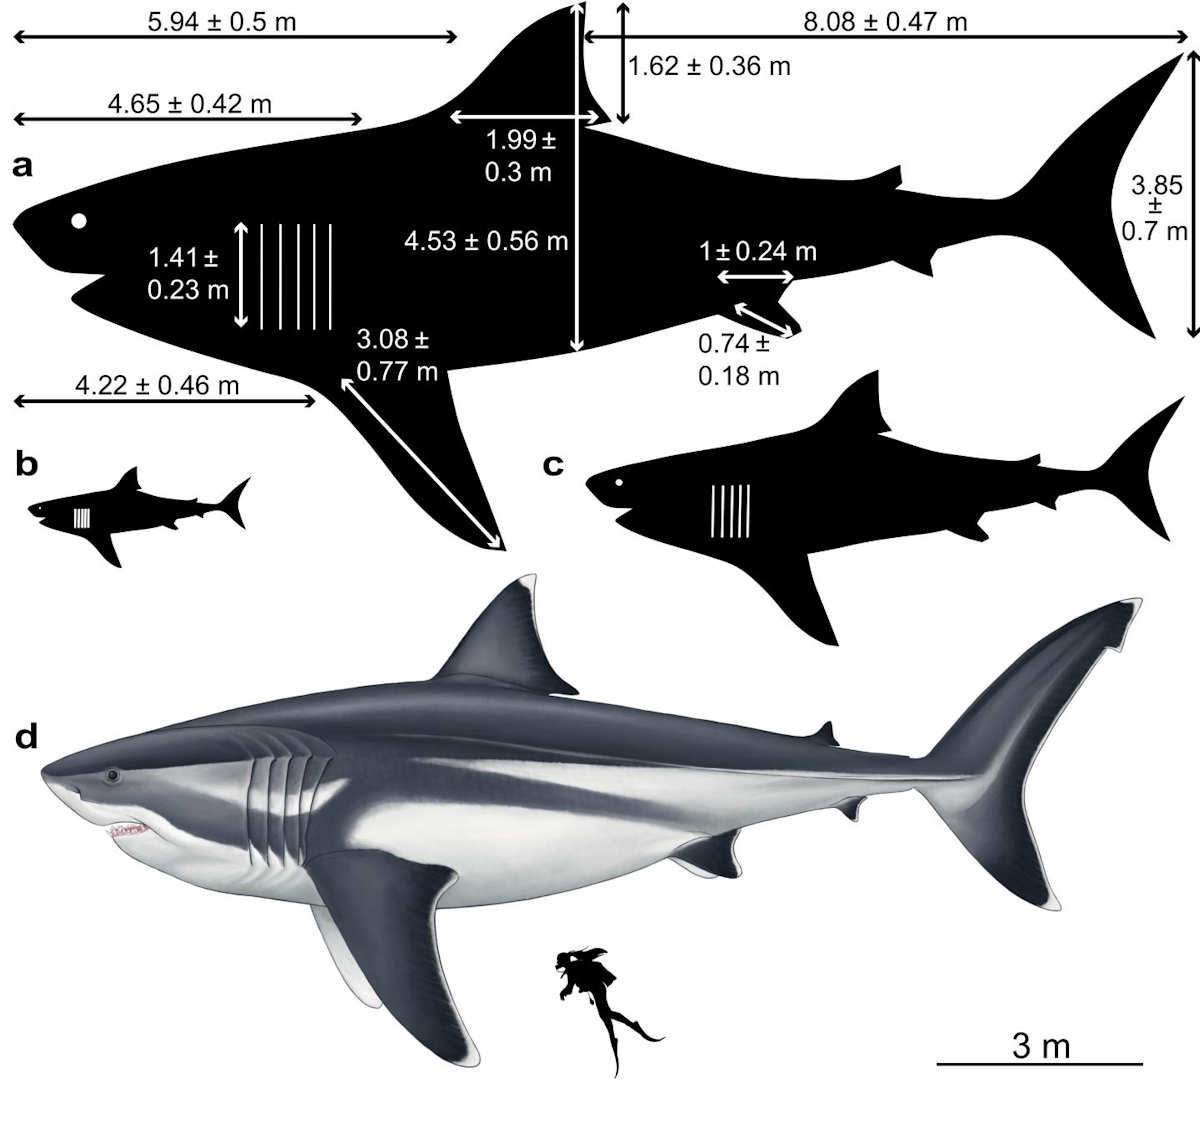 Computational reconstruction of Megalodon's size and proportions at different life stages: a) 16m adult with 12 estimated body dimensions recorded; b) 3m new-born and c) 8m juvenile. By Oliver E. Demuth.